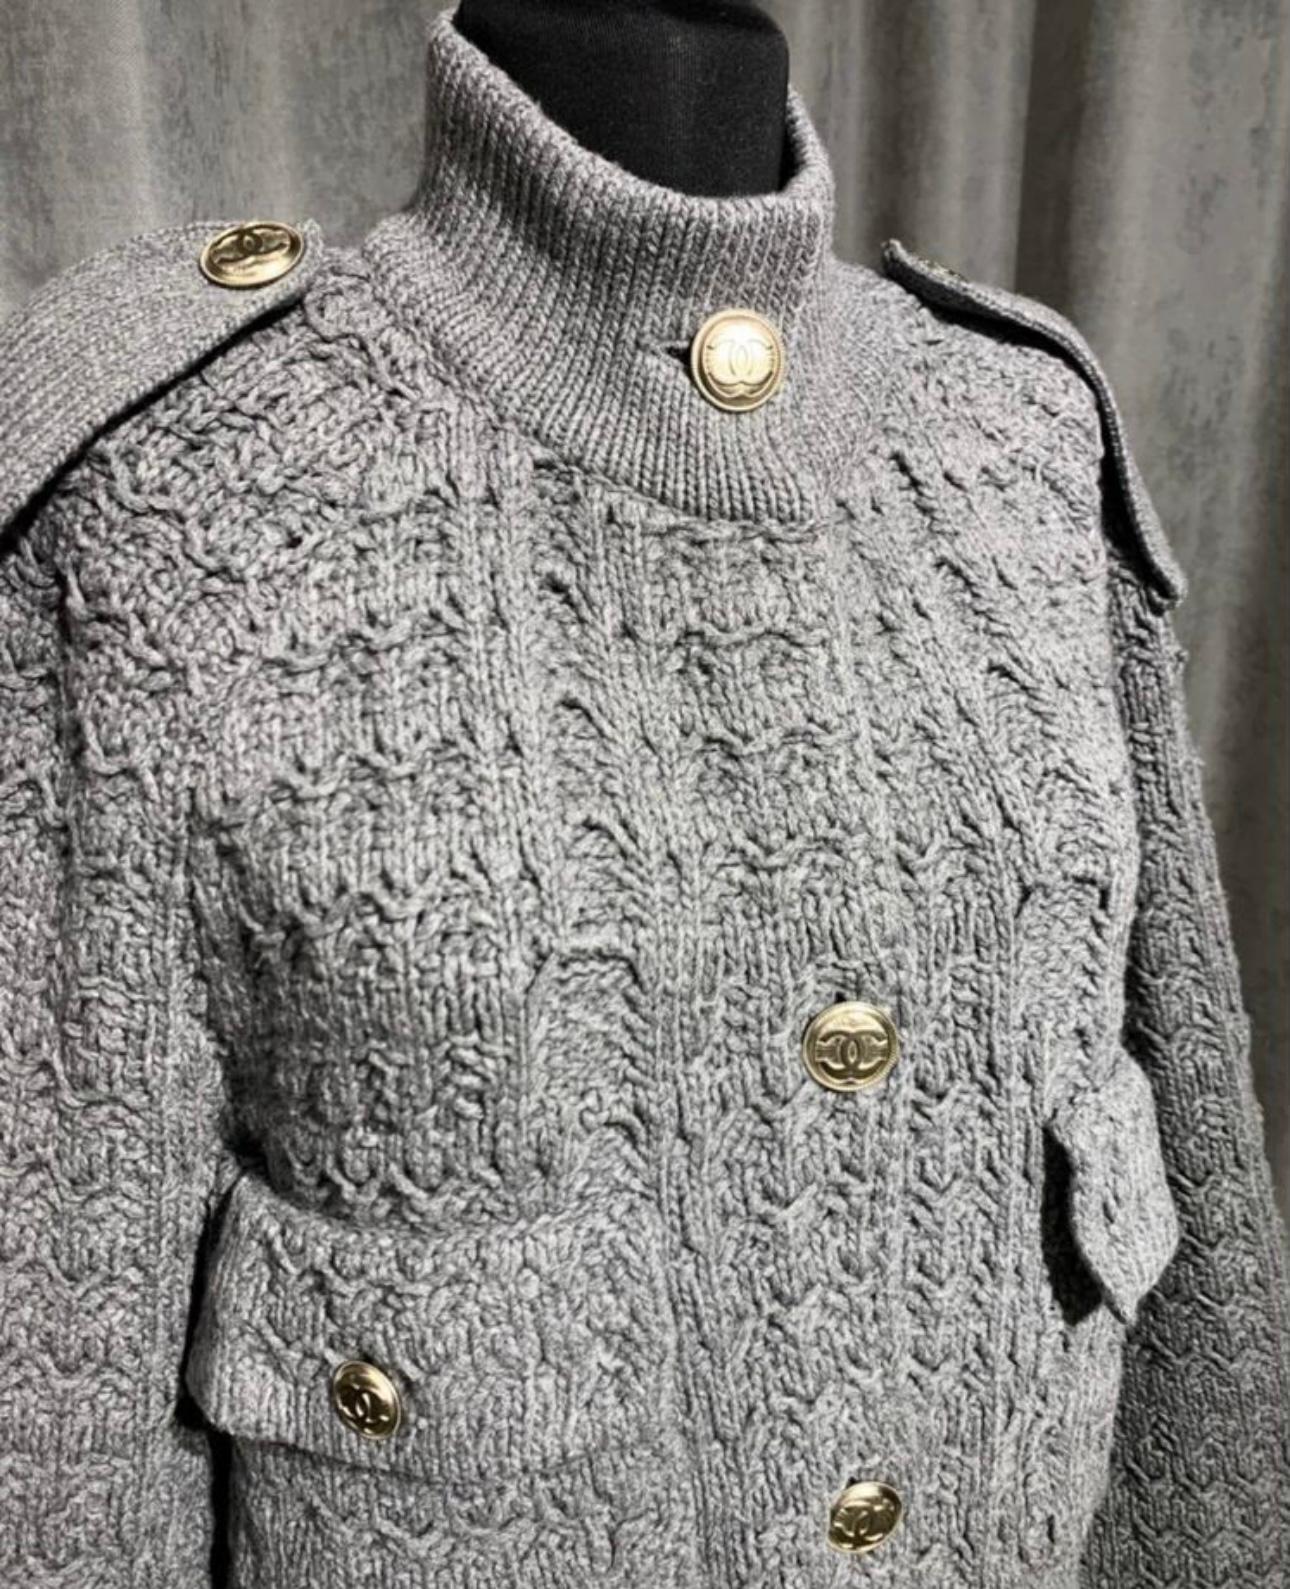 New Chanel oversized chunky knit coat in a noble blueish grey colour shade.
Boutique price ca. 7,620$
- CC logo buttons 
Size mark 34 FR. Never worn.